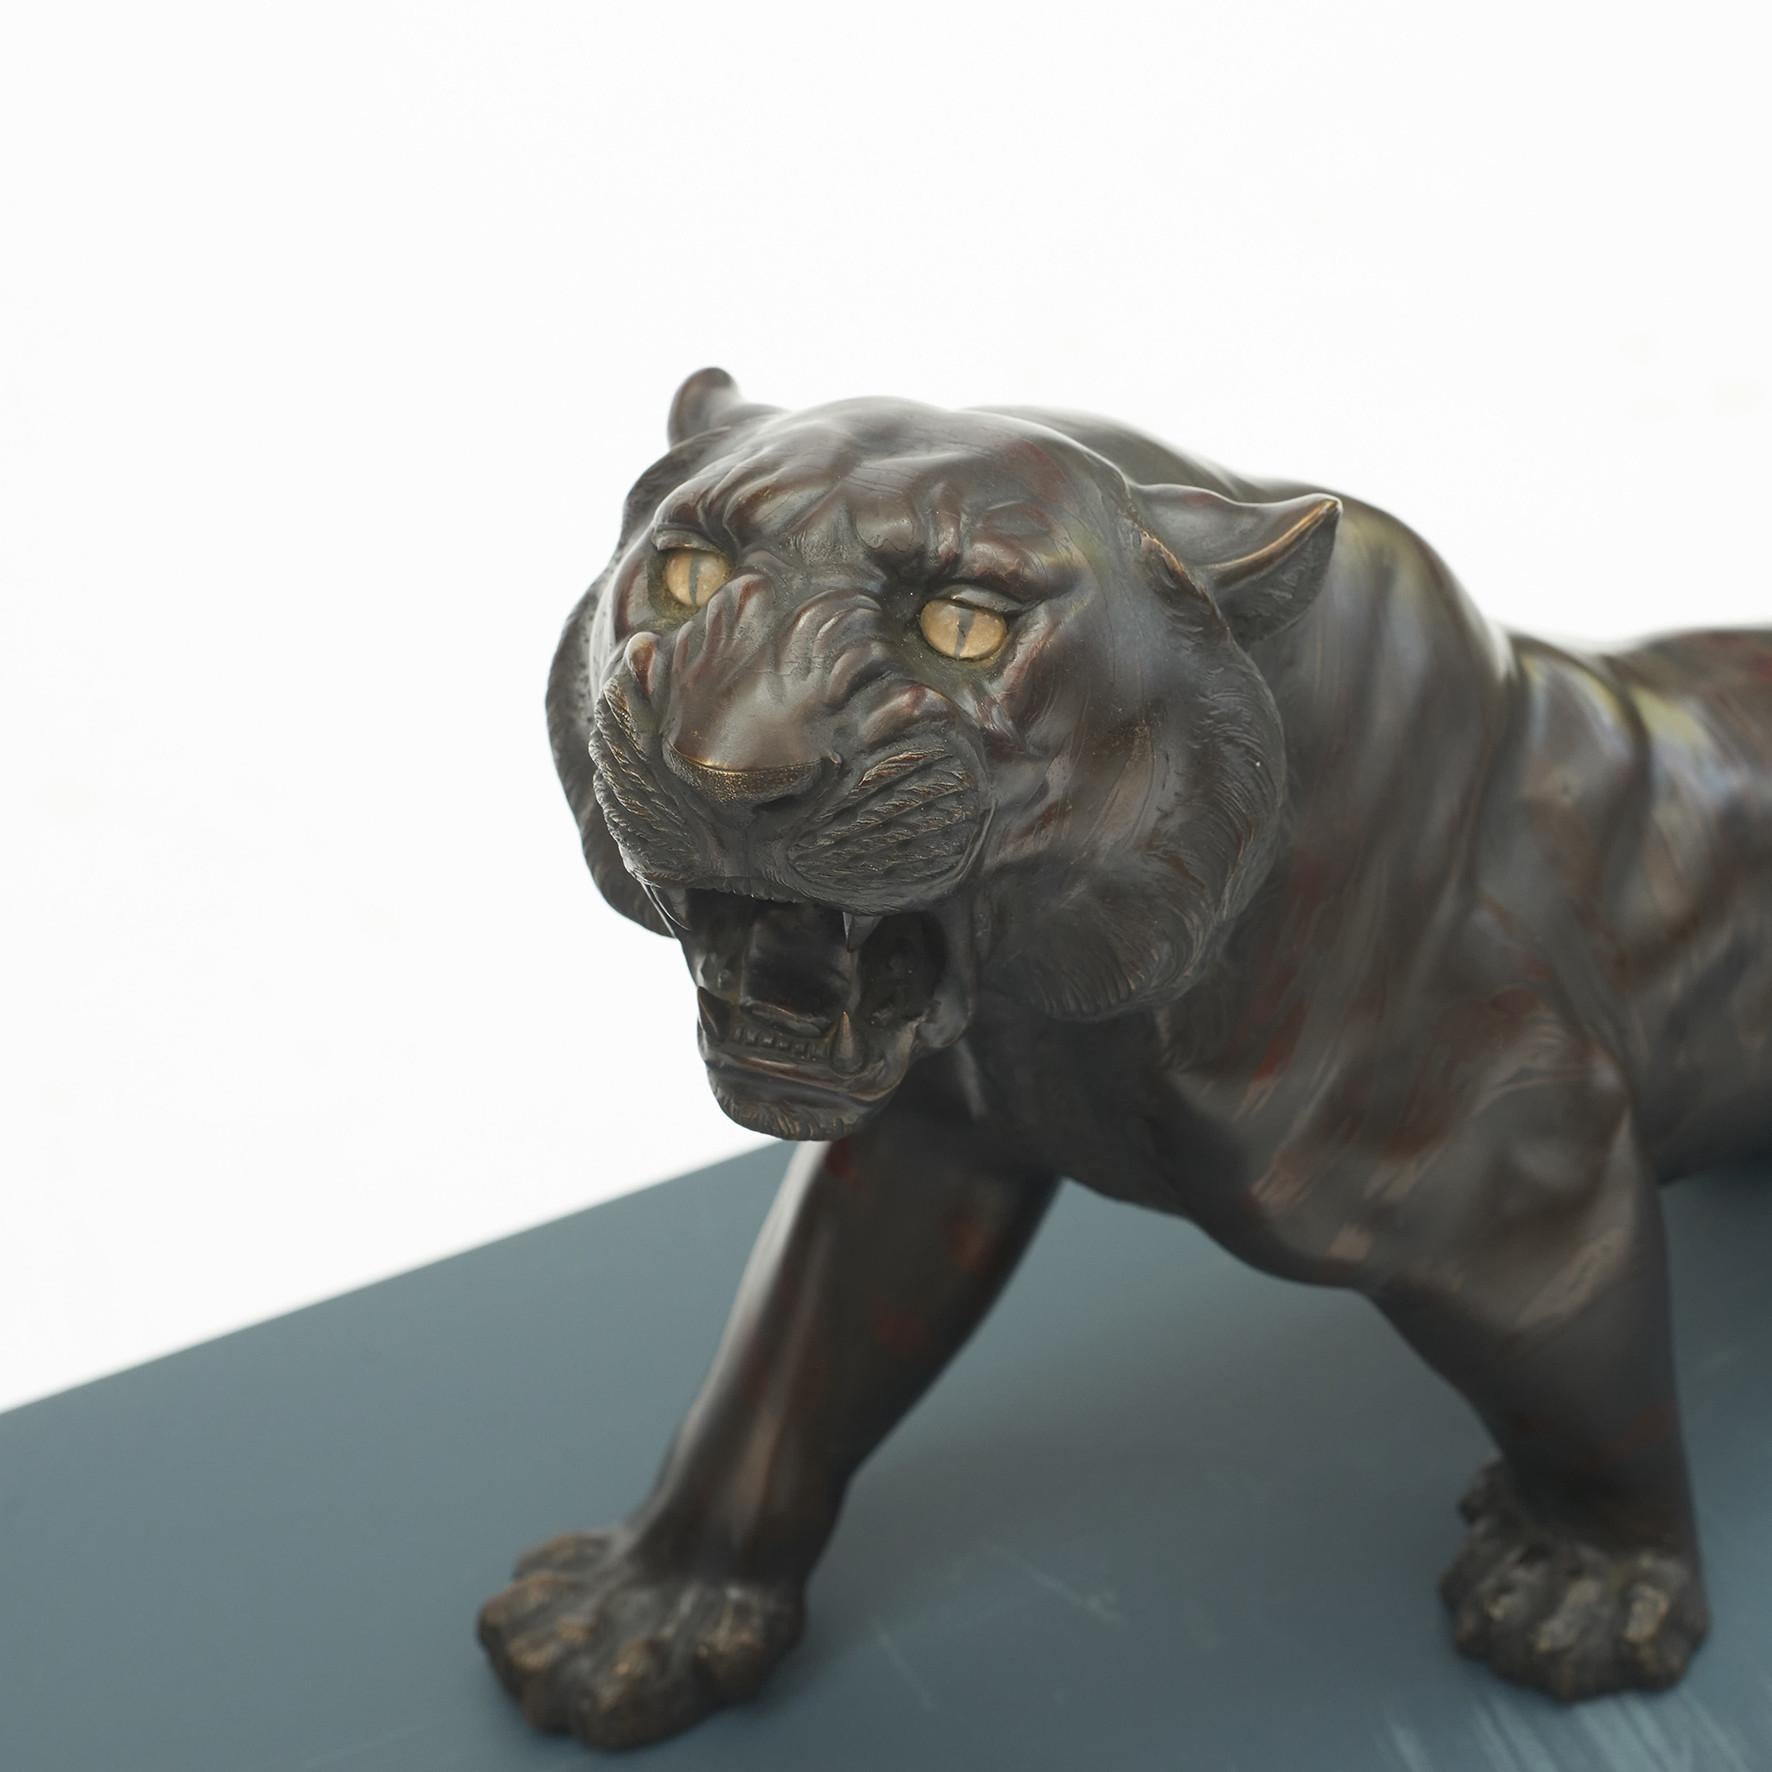 Large Japanese patinated bronze tiger with inset glass eyes.
Meiji period, 1868-1912.
The sculpture is signed with a small seal: Meiji/Taisho.
In perfect condition with a fine patina.
Weight: 6850 g.
Length: 57 cm.